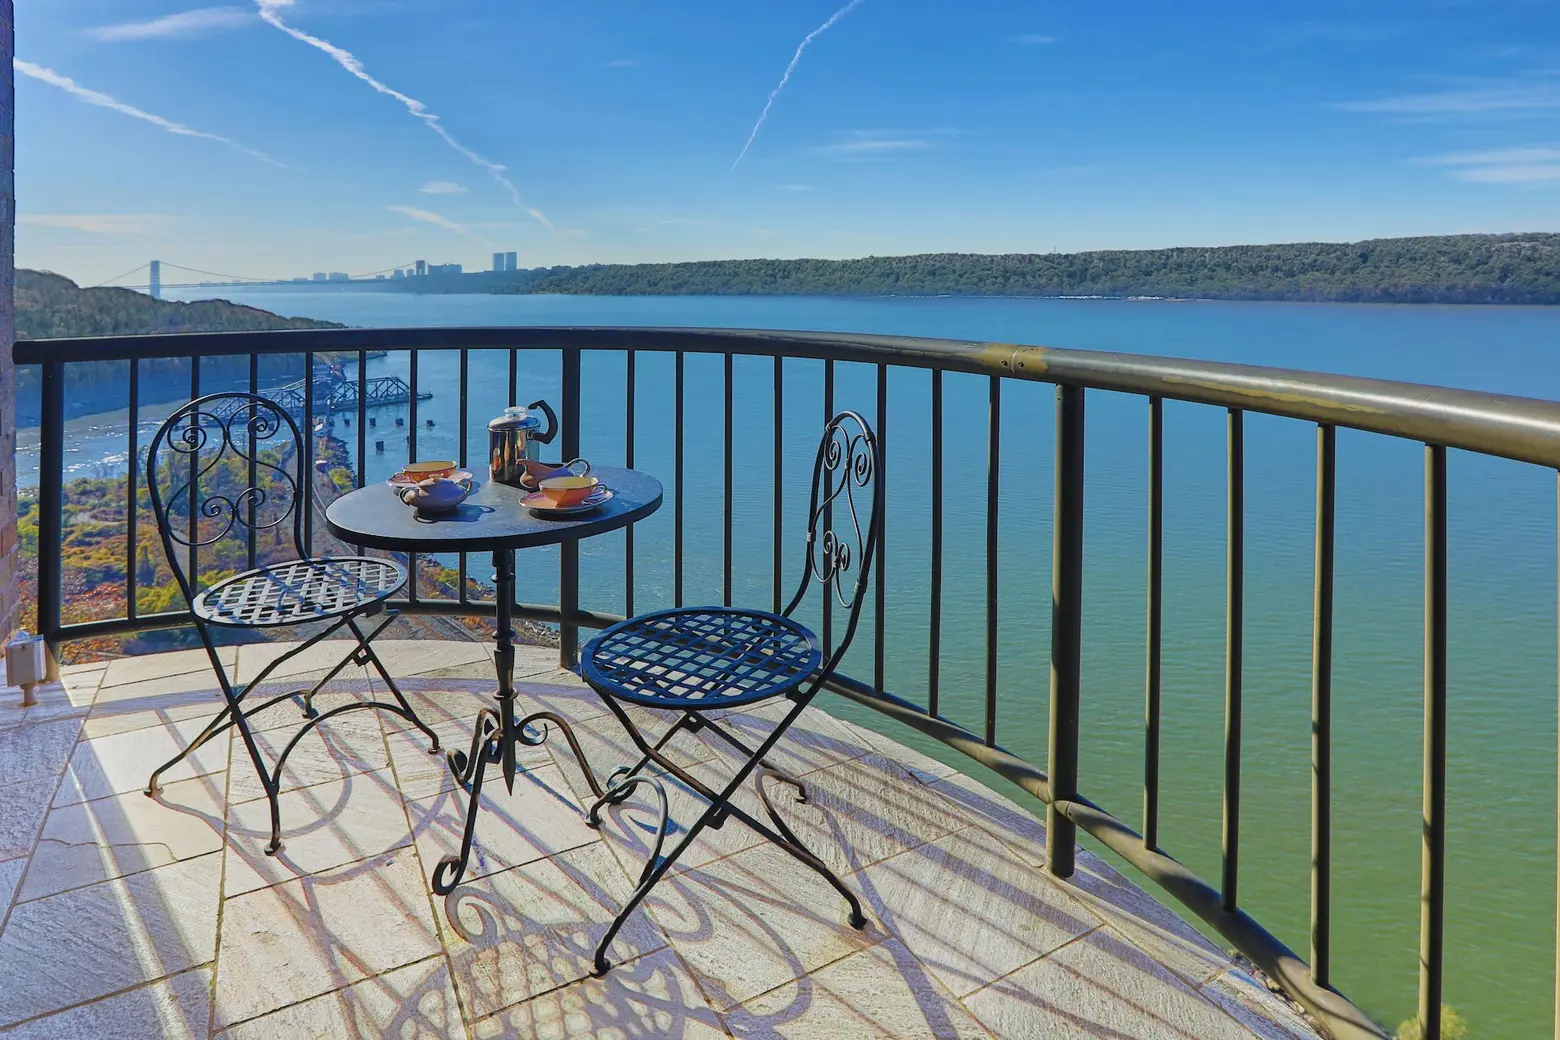 For $1.2M, this Spuyten Duyvil condo has 3 bedrooms, 3 parking spaces, and Hudson River views